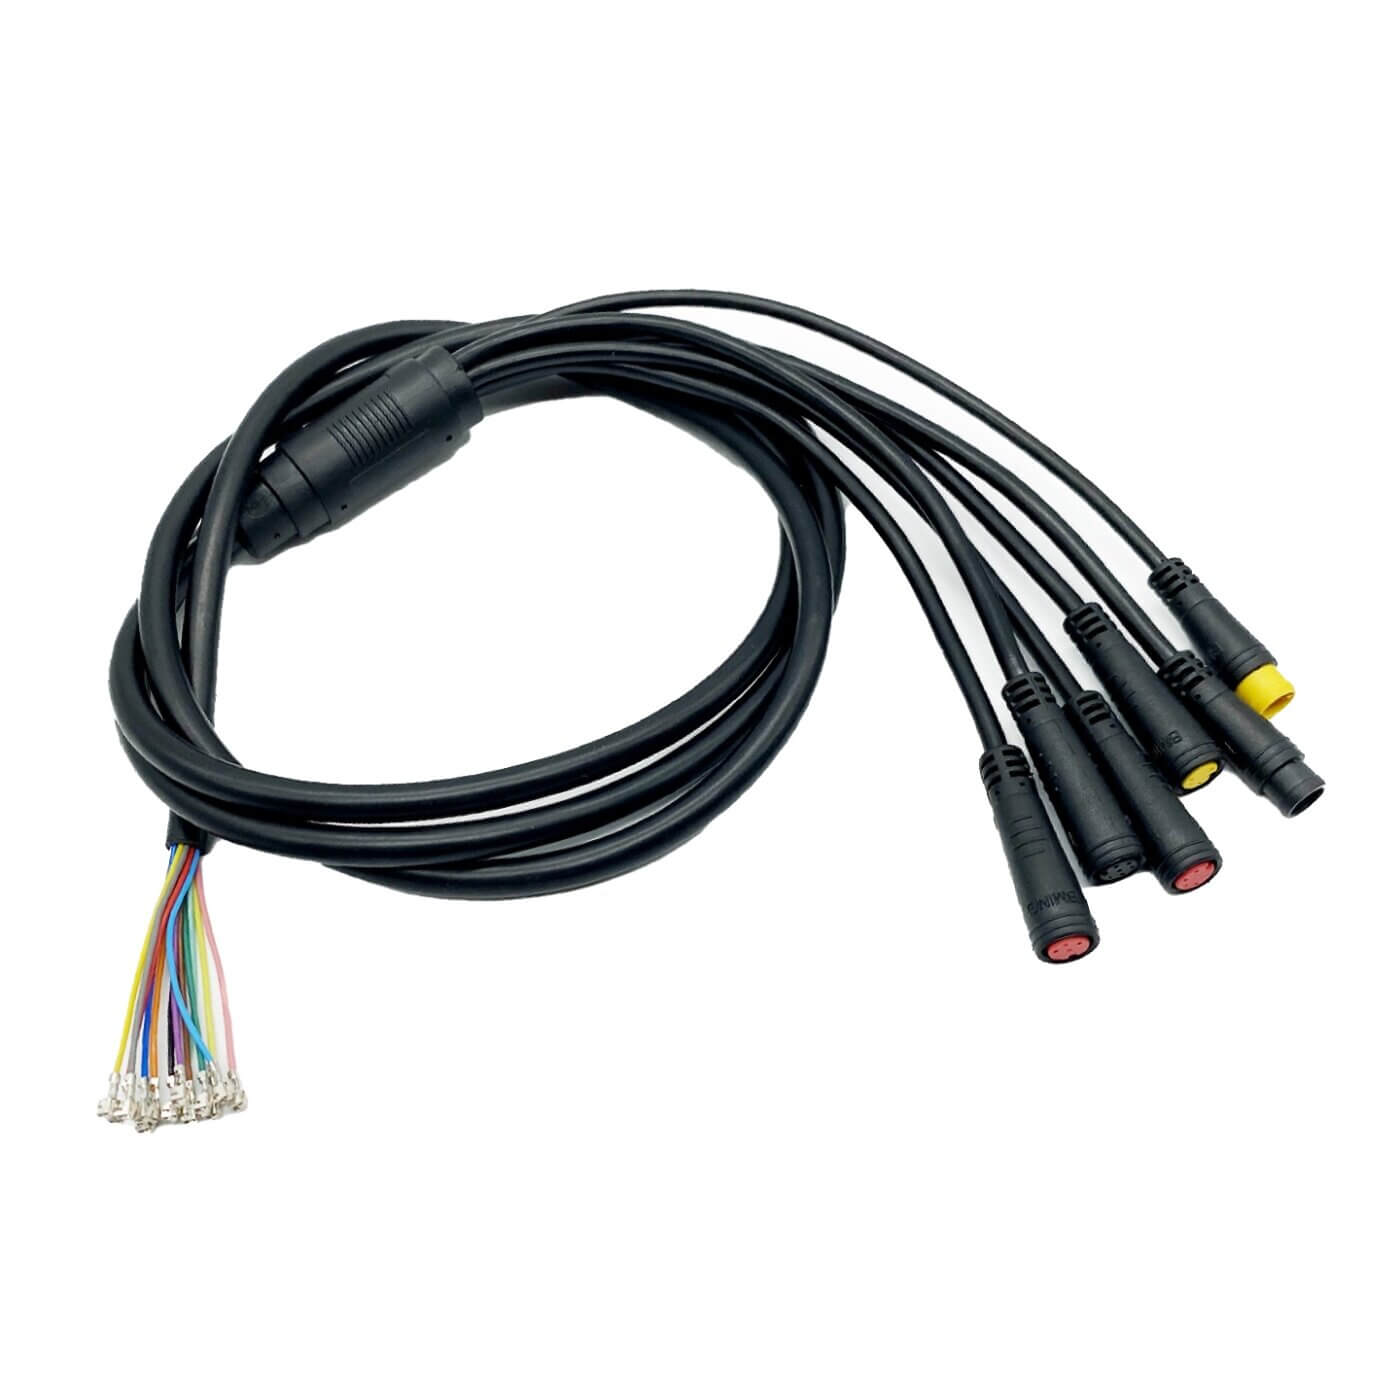 A black Main Transfer Cable with four different colored wires used for main transfer.